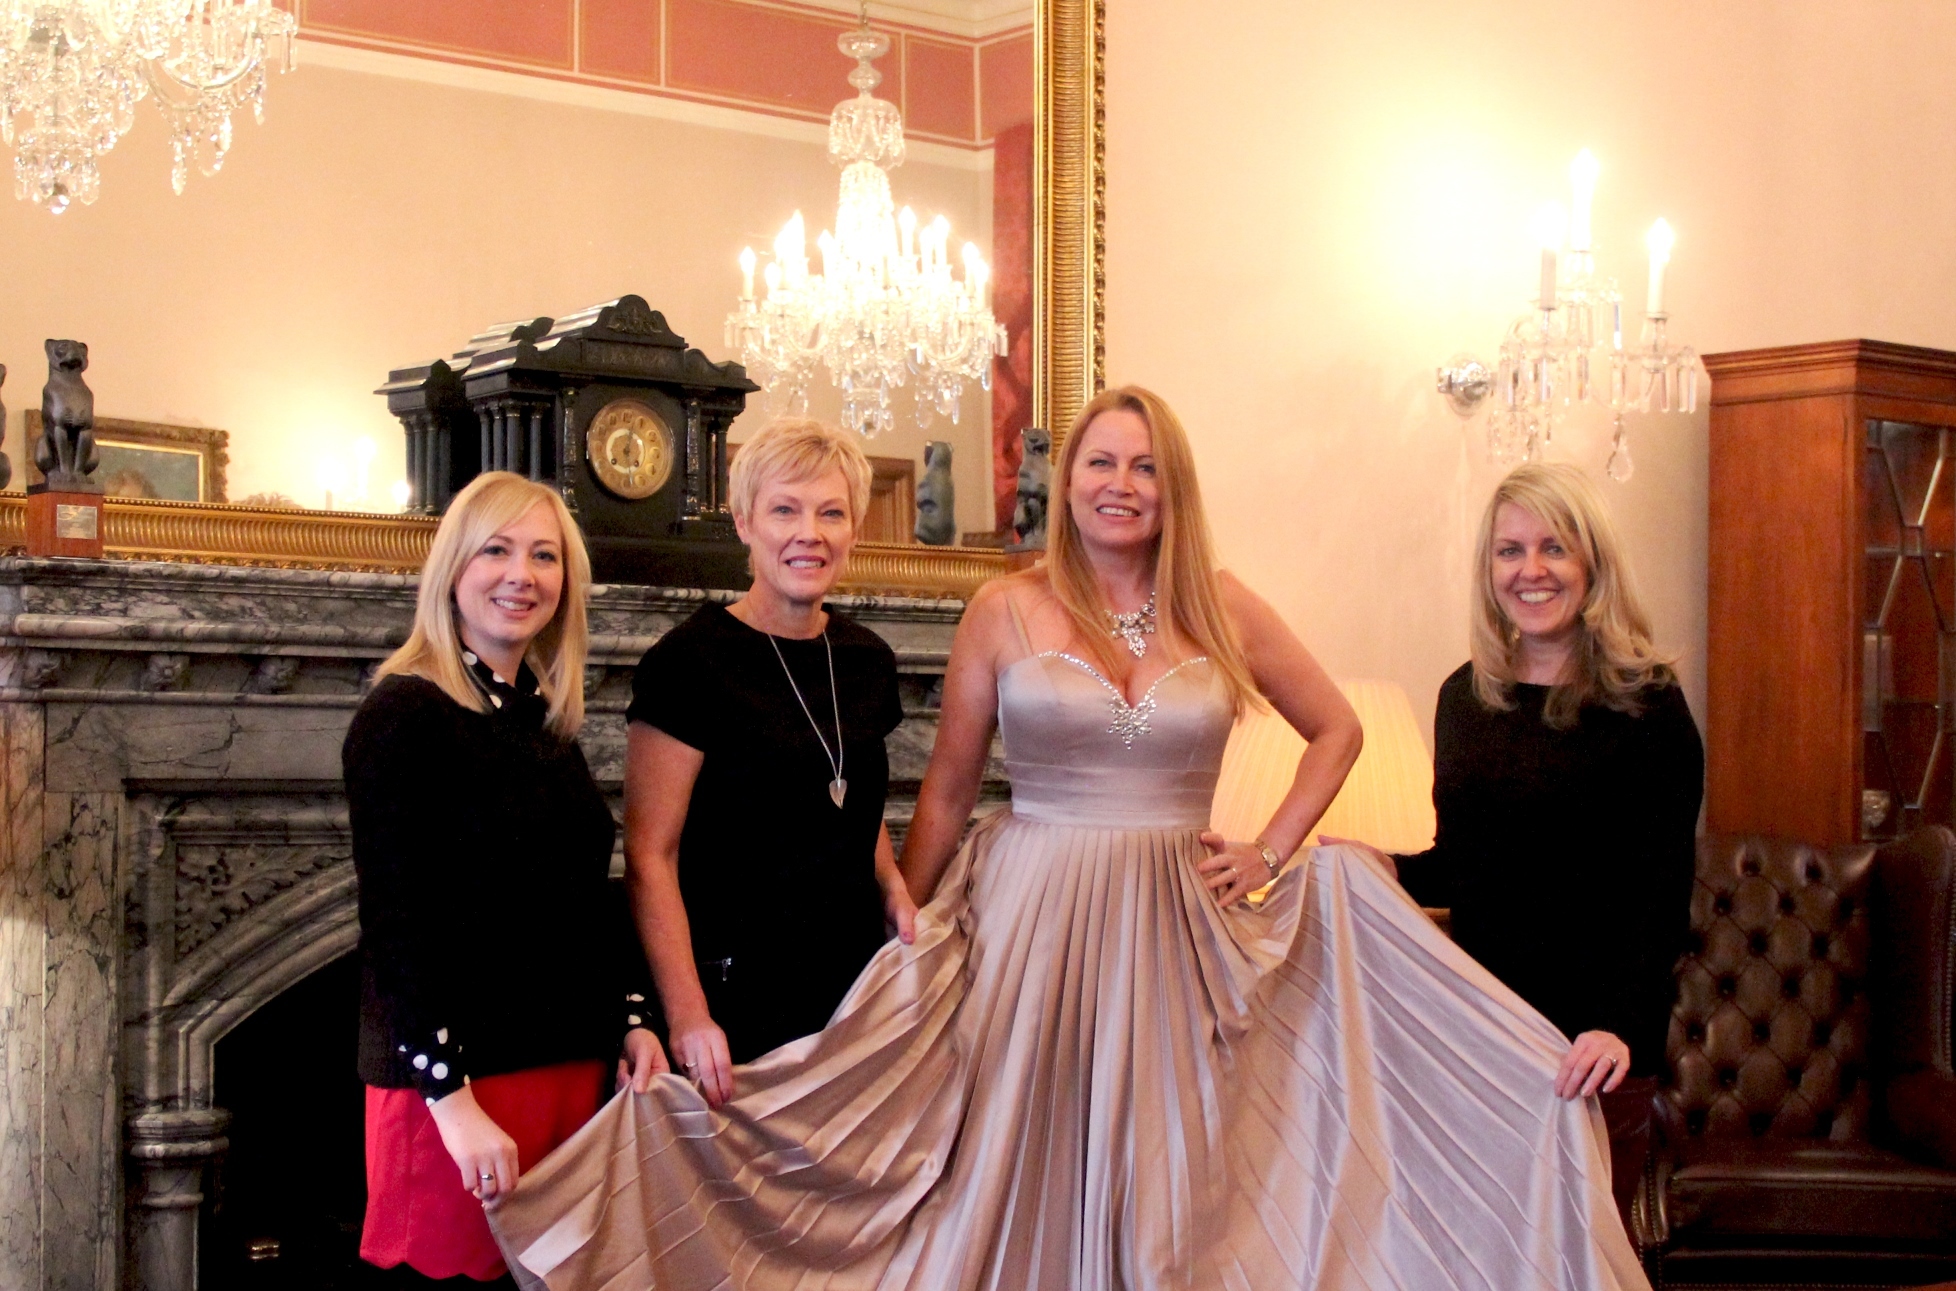 Left to right: Katie Watters, Cornerstone Fundraising Events Co-ordinator; Event organiser, Debbie Butler; Model, Dez Elliot (wearing the auction dress); and Lisa Duthie, Director of Corporate Relations & Fundraising